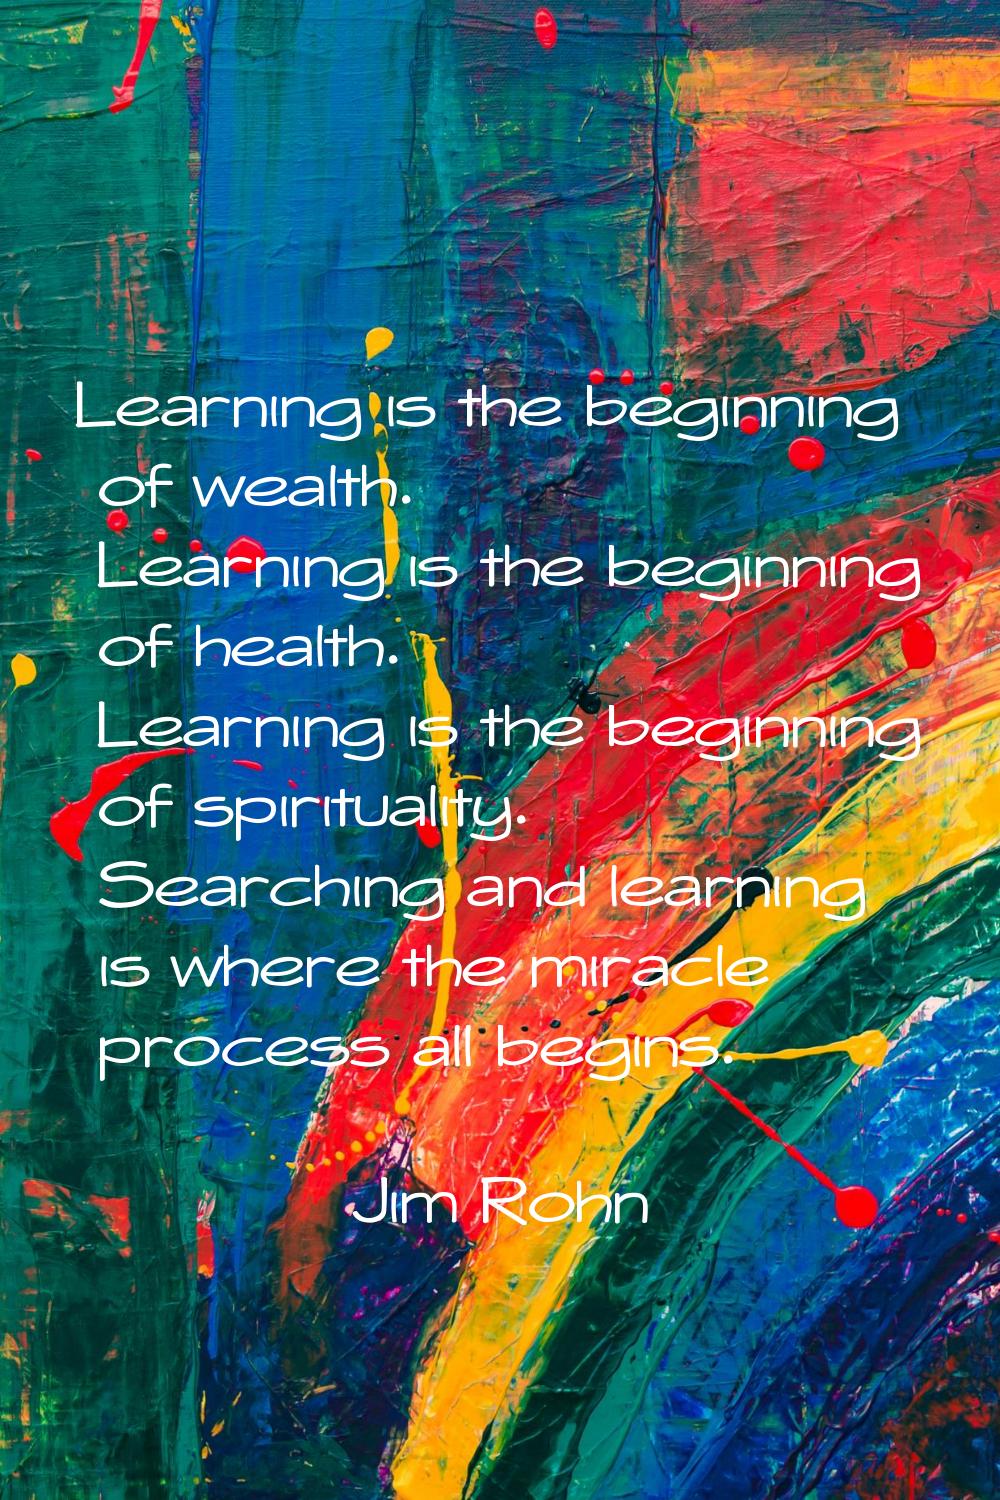 Learning is the beginning of wealth. Learning is the beginning of health. Learning is the beginning